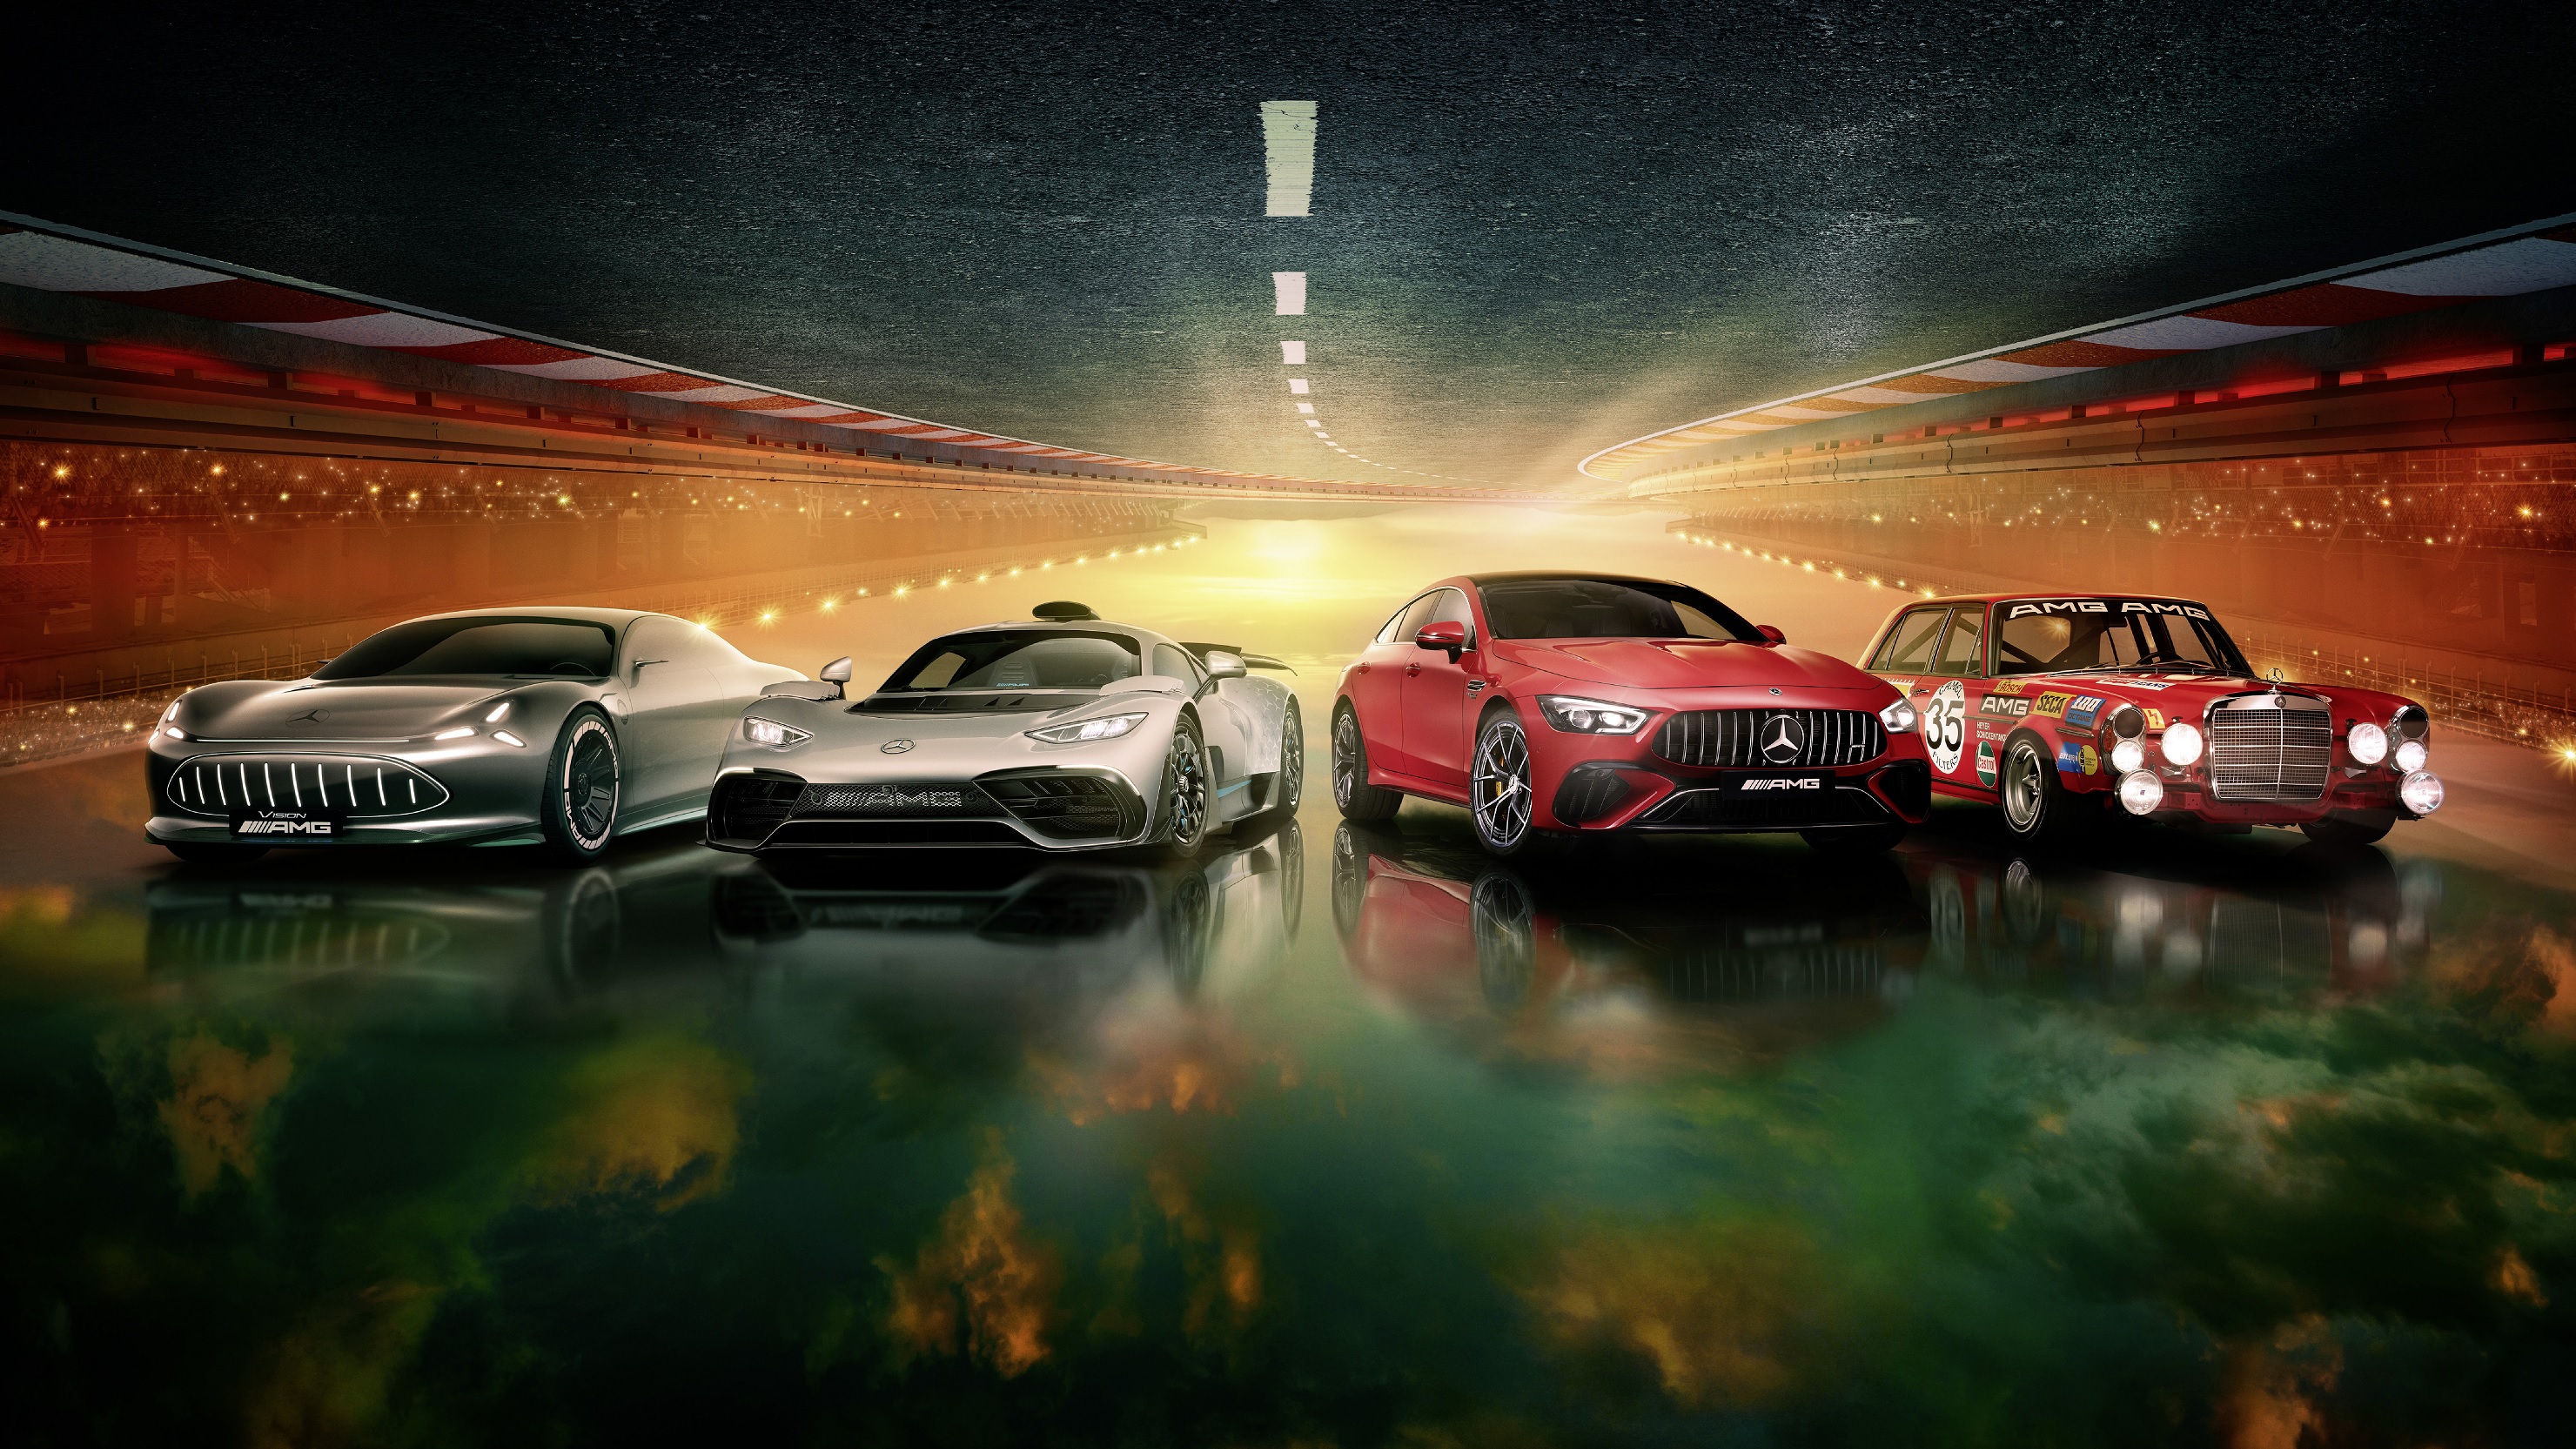 From left to right, the Mercedes Vision AMG design study, Mercedes-AMG One, 2022 Mercedes-AMG GT 4-door Coupe, and 1971 Mercedes 300 SEL 6.8 'Rote Sau' in a stylized tunnel